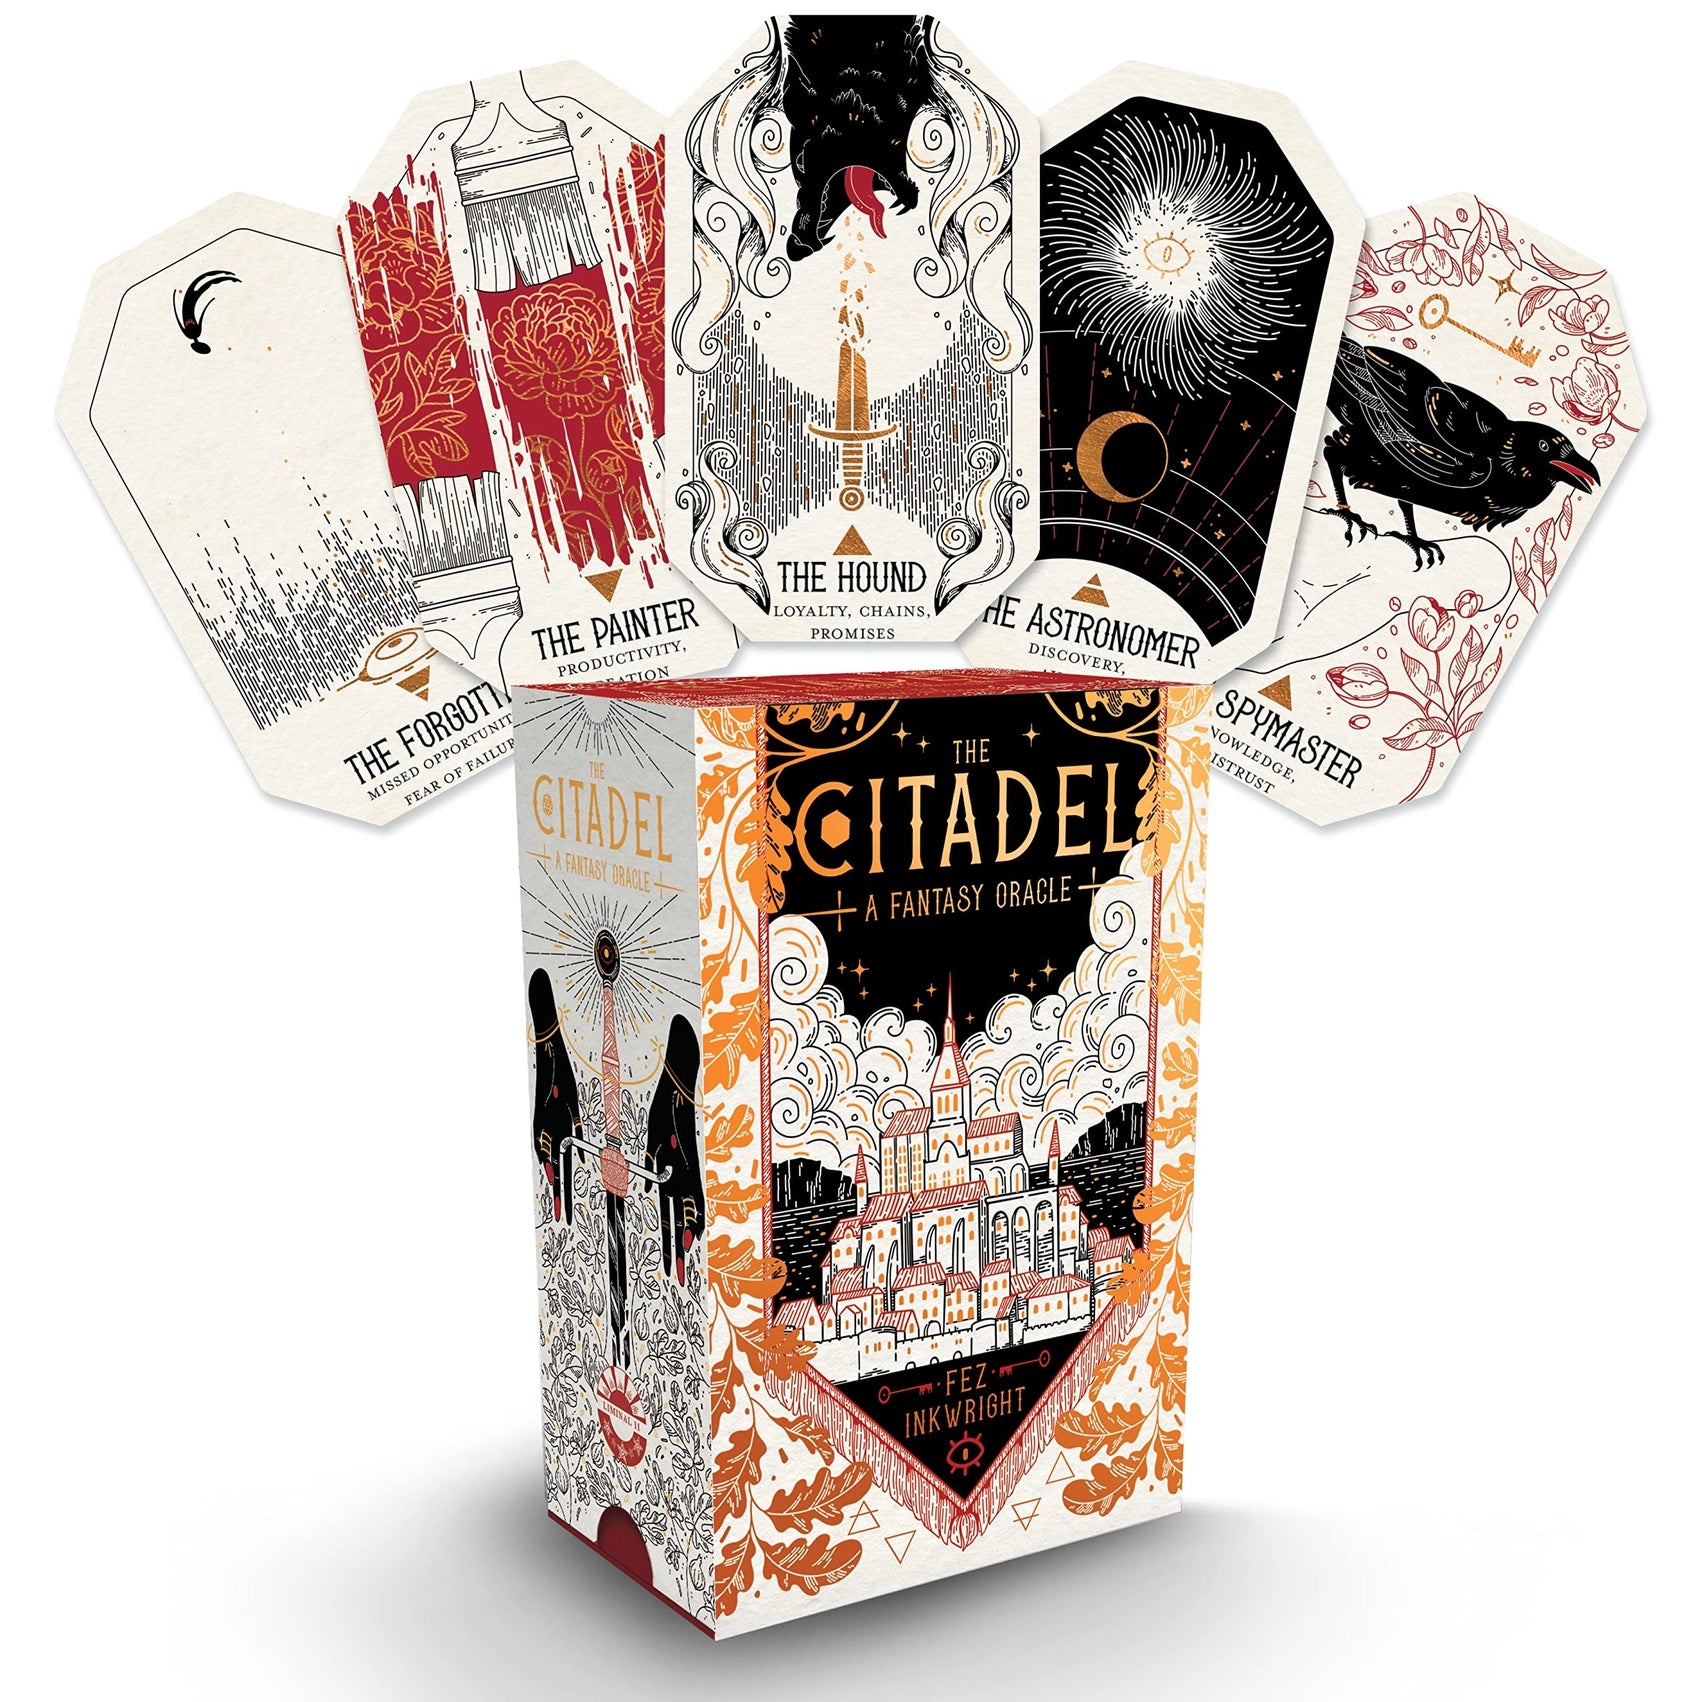 The Citadel: A Fantasy Oracle by Fez Inkwright